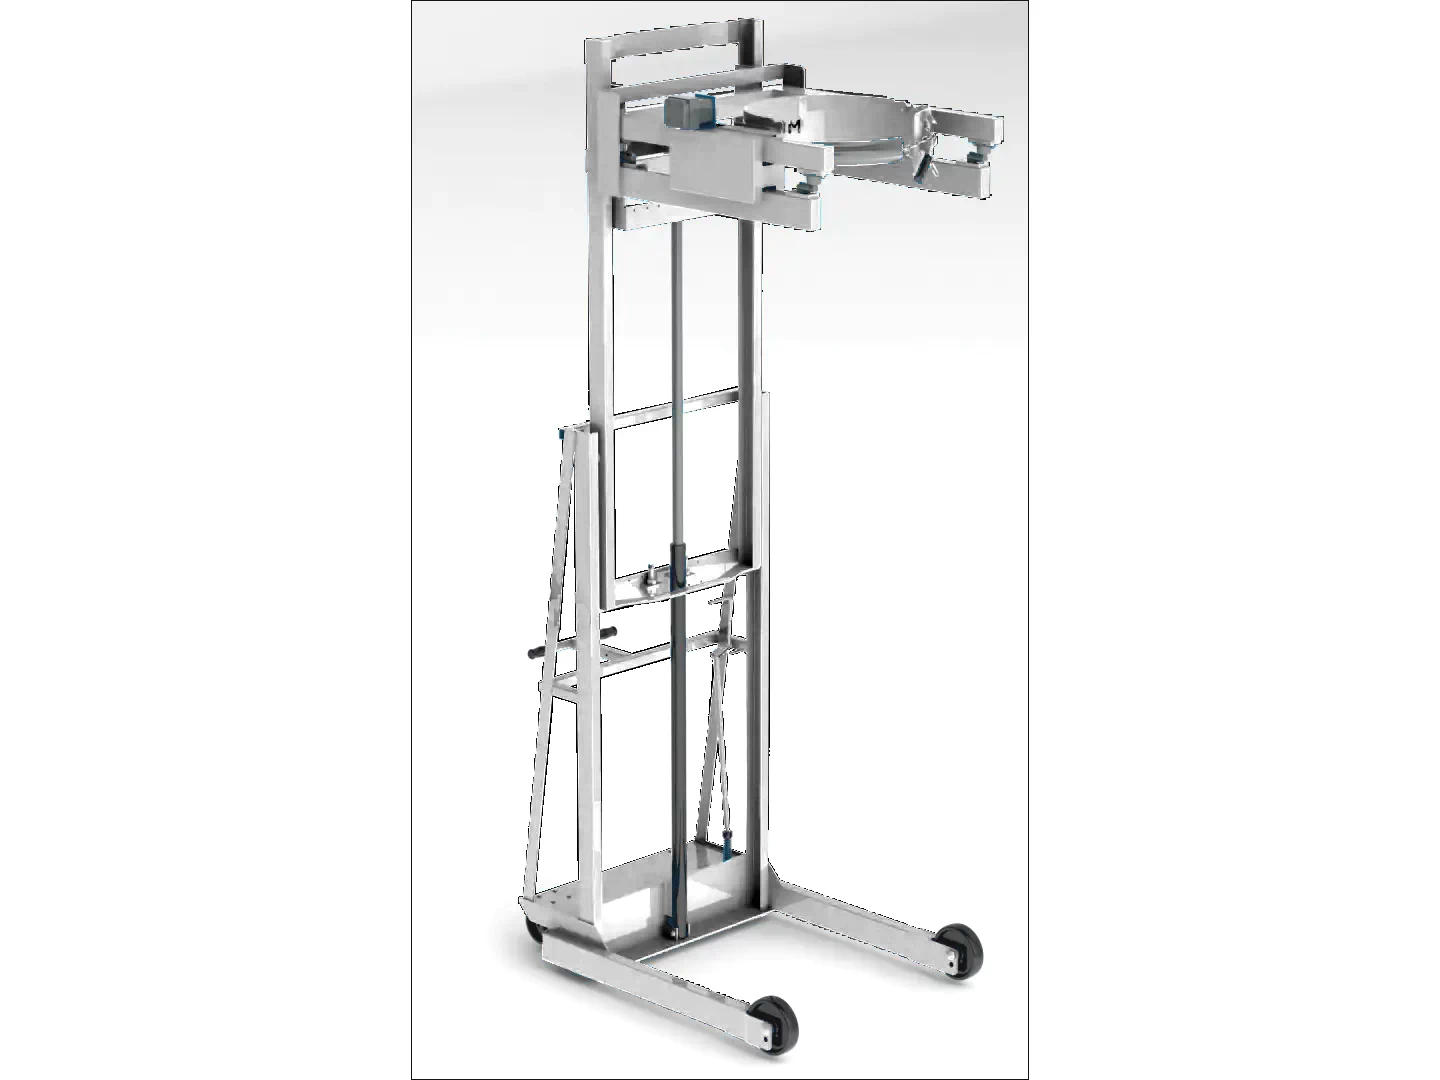 520 Series Stainless Steel Vertical-Lift Drum Pourer